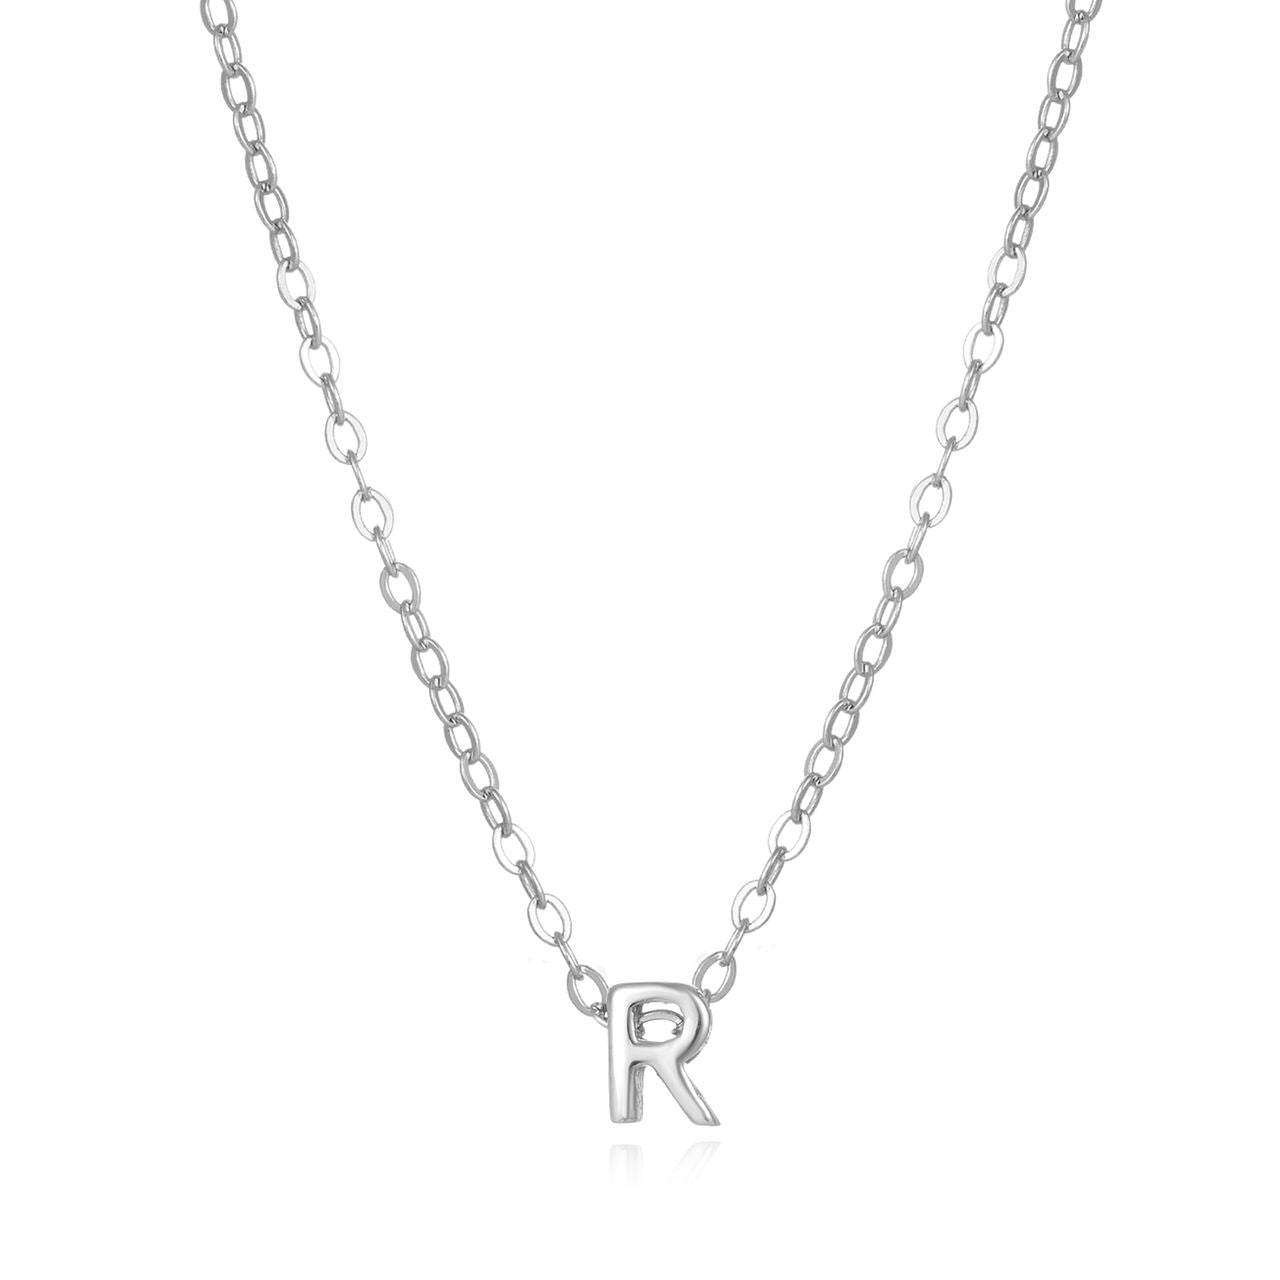 Petite initial R pendant on a sterling silver necklace